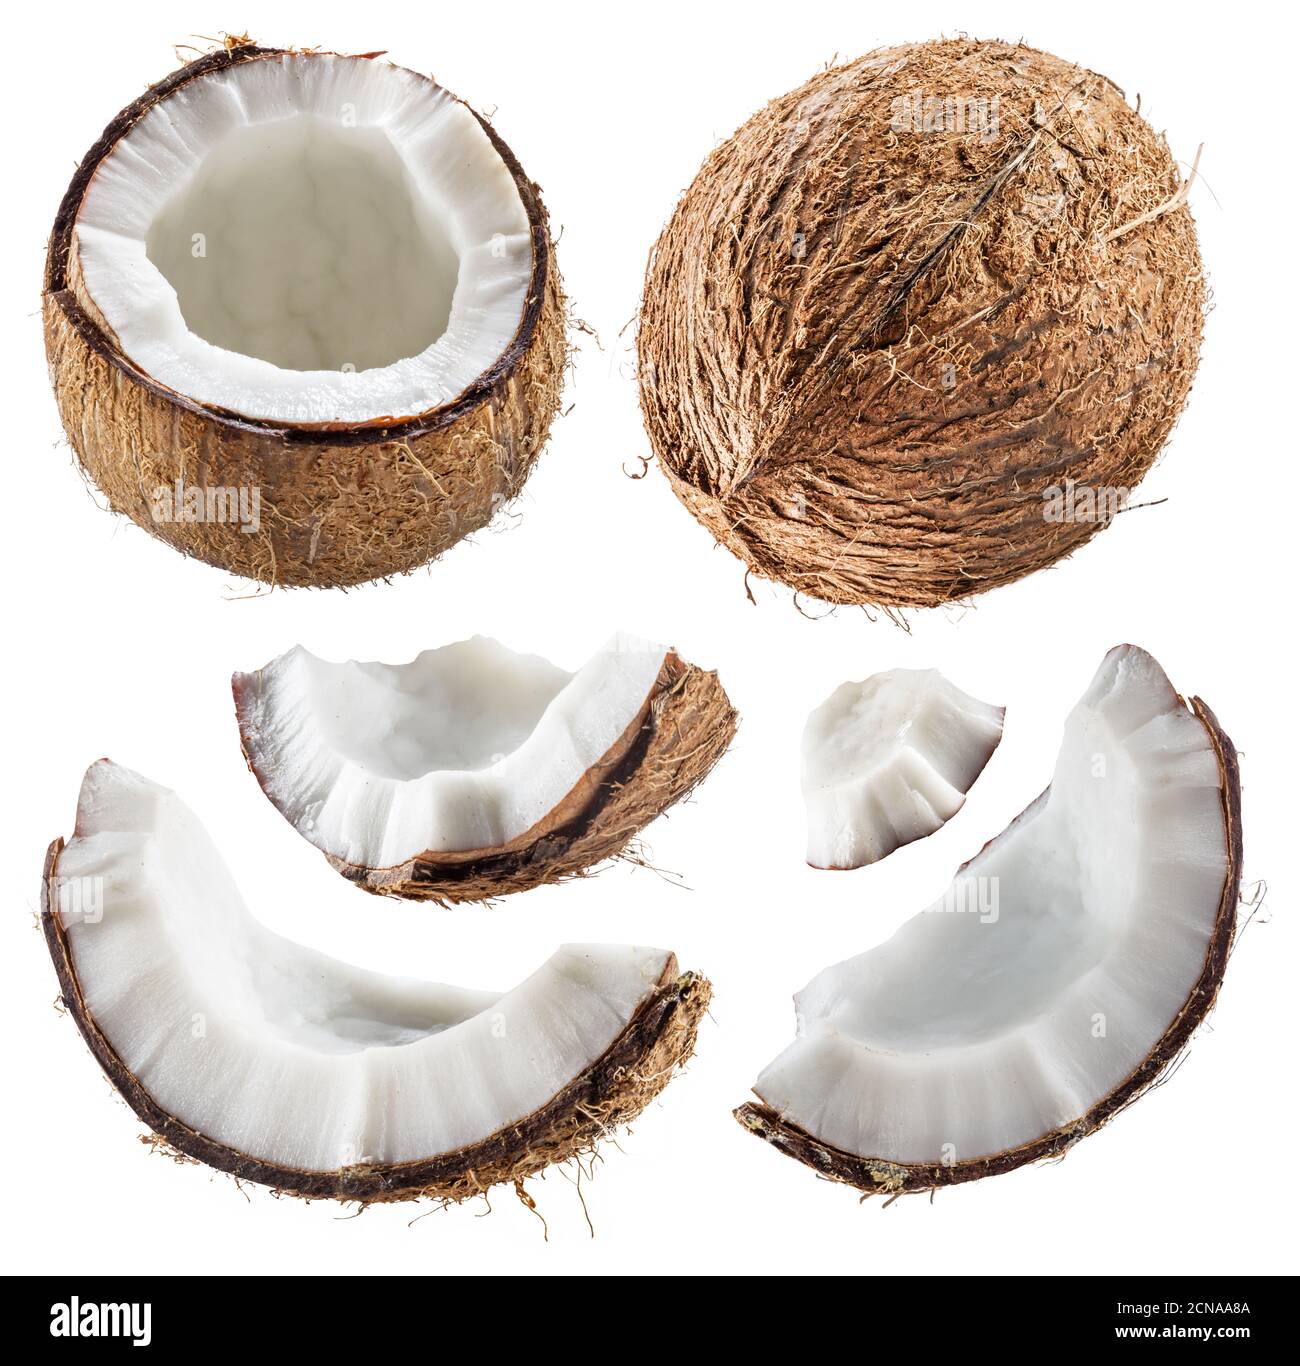 Different coconuts with pieces of cracked coconut fruit with white flesh isolated on white background. Stock Photo